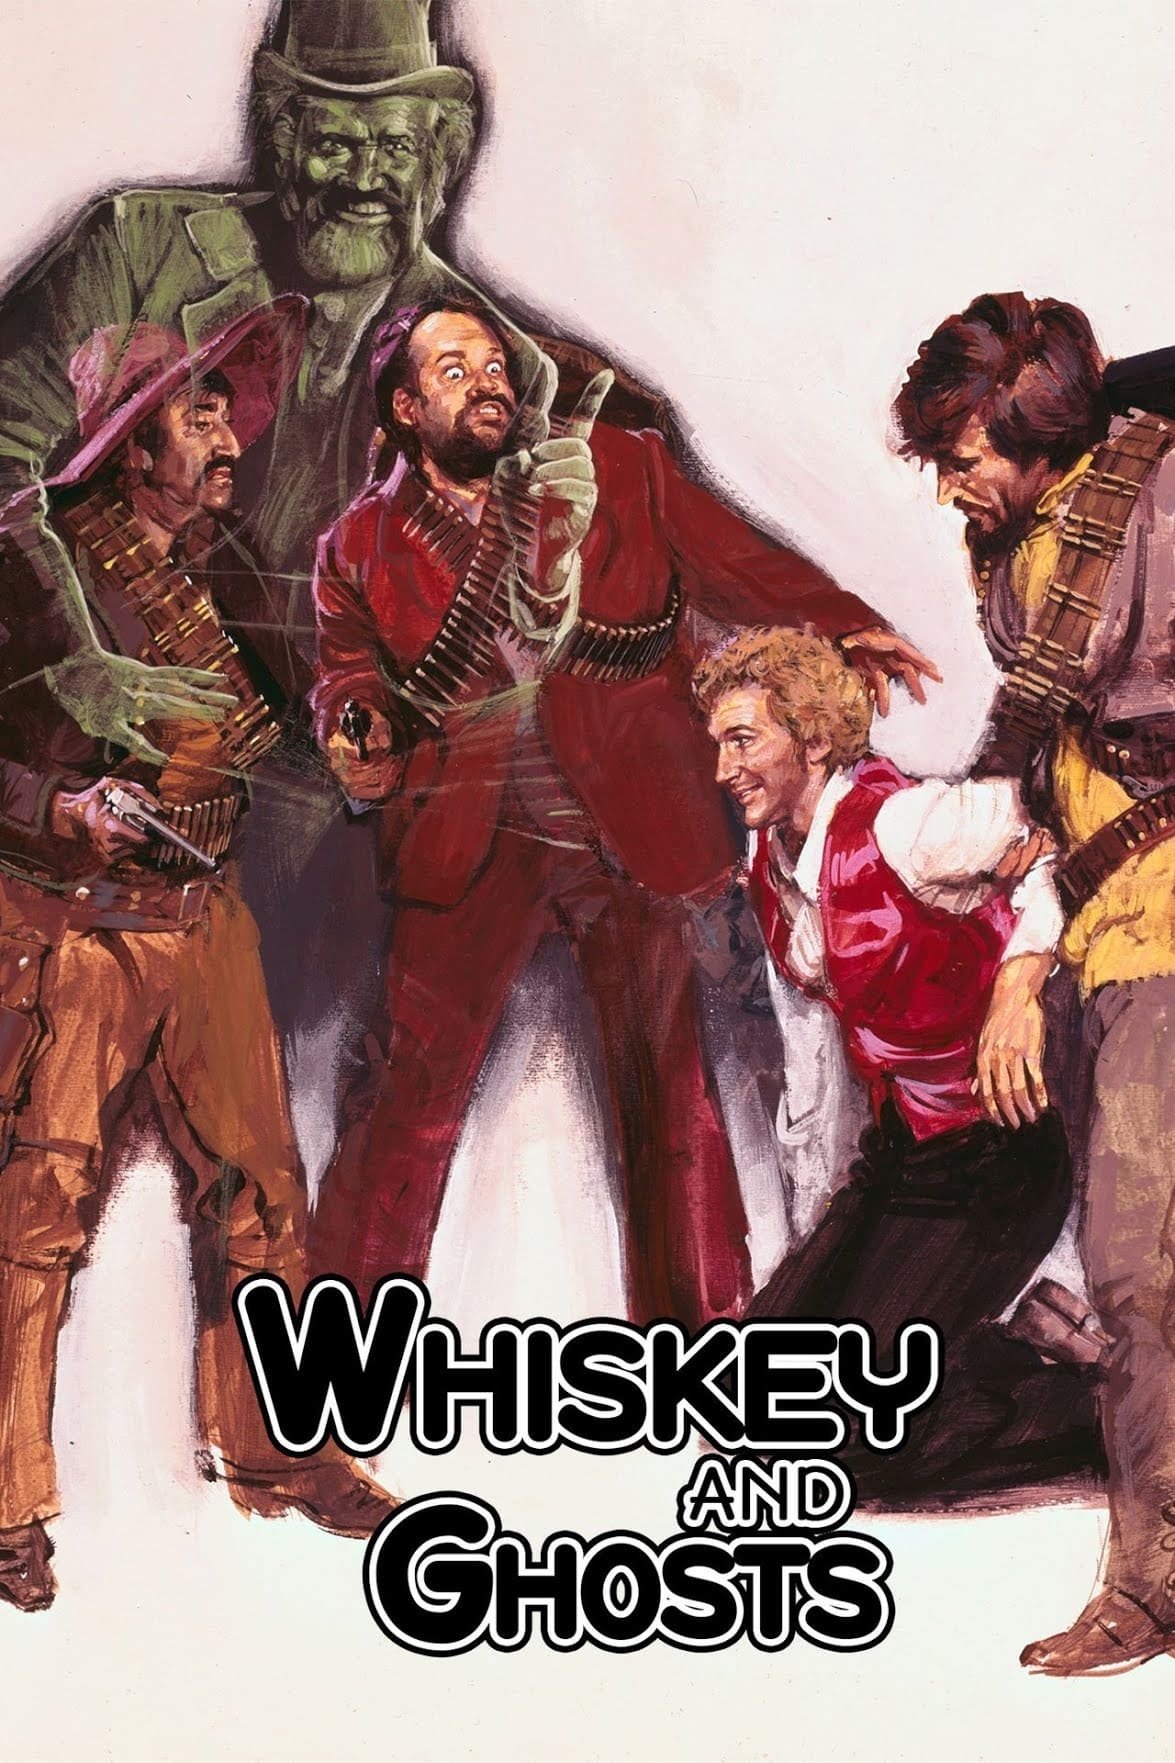 Whisky and Ghosts